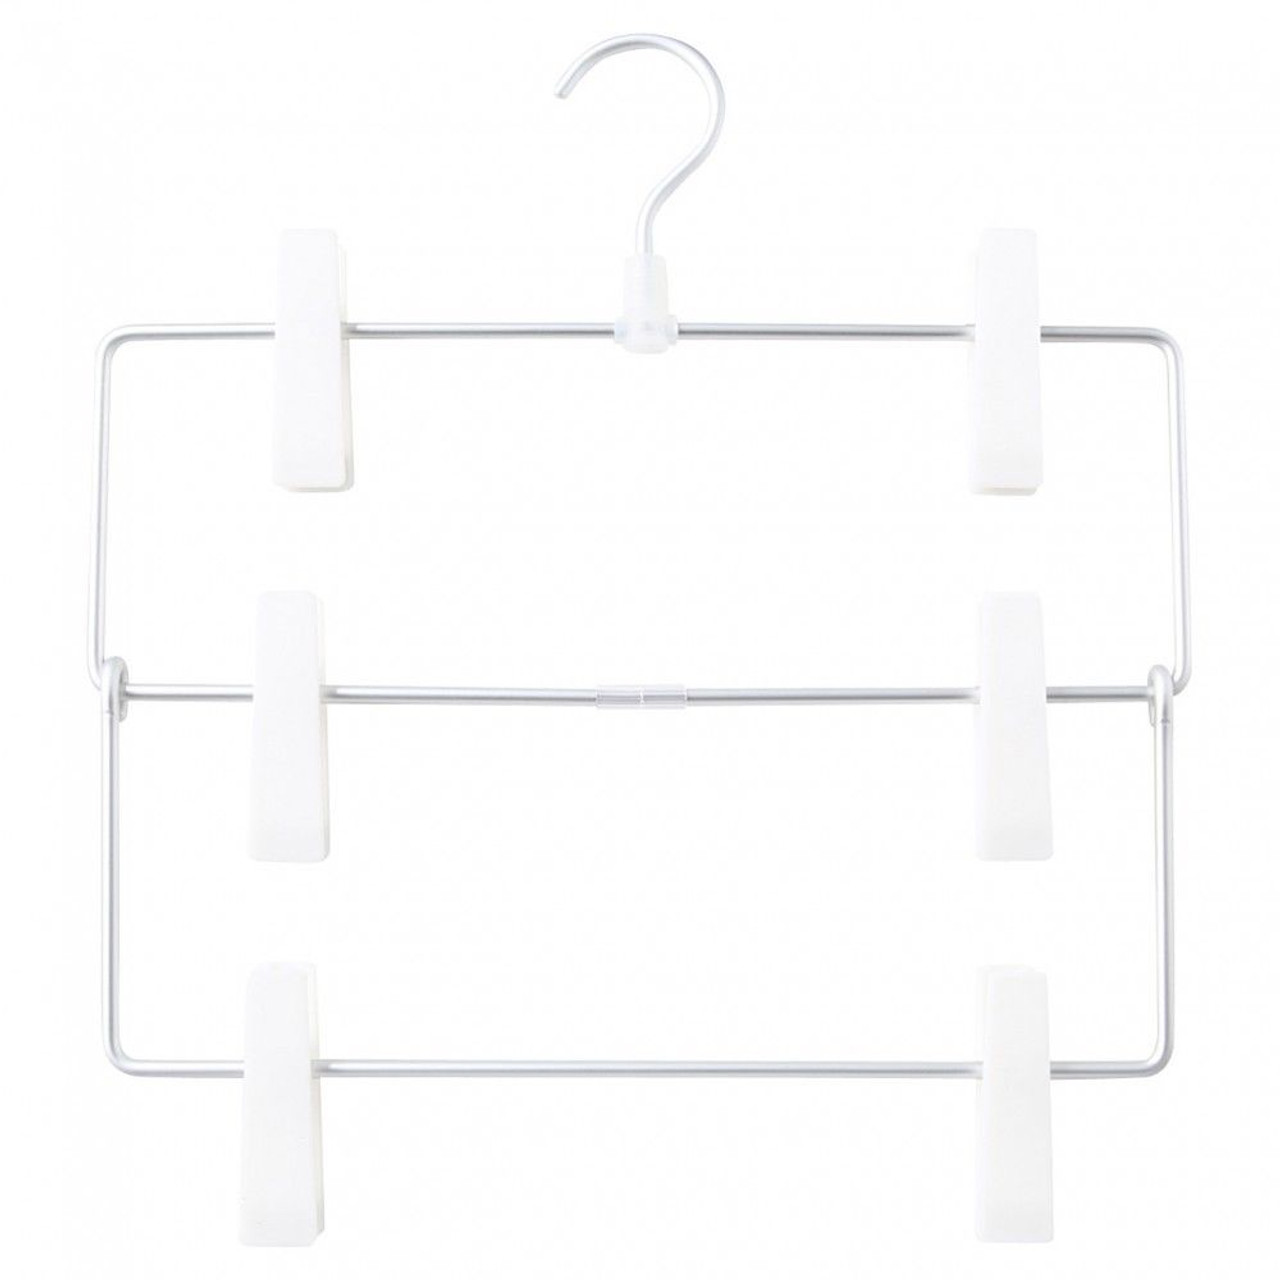 SALE Price, MUJI Aluminum hanger For pants/skirts 3 steps W35×D3×H38.5cm  Alumite MoMA 15820894 Clothes Hangers